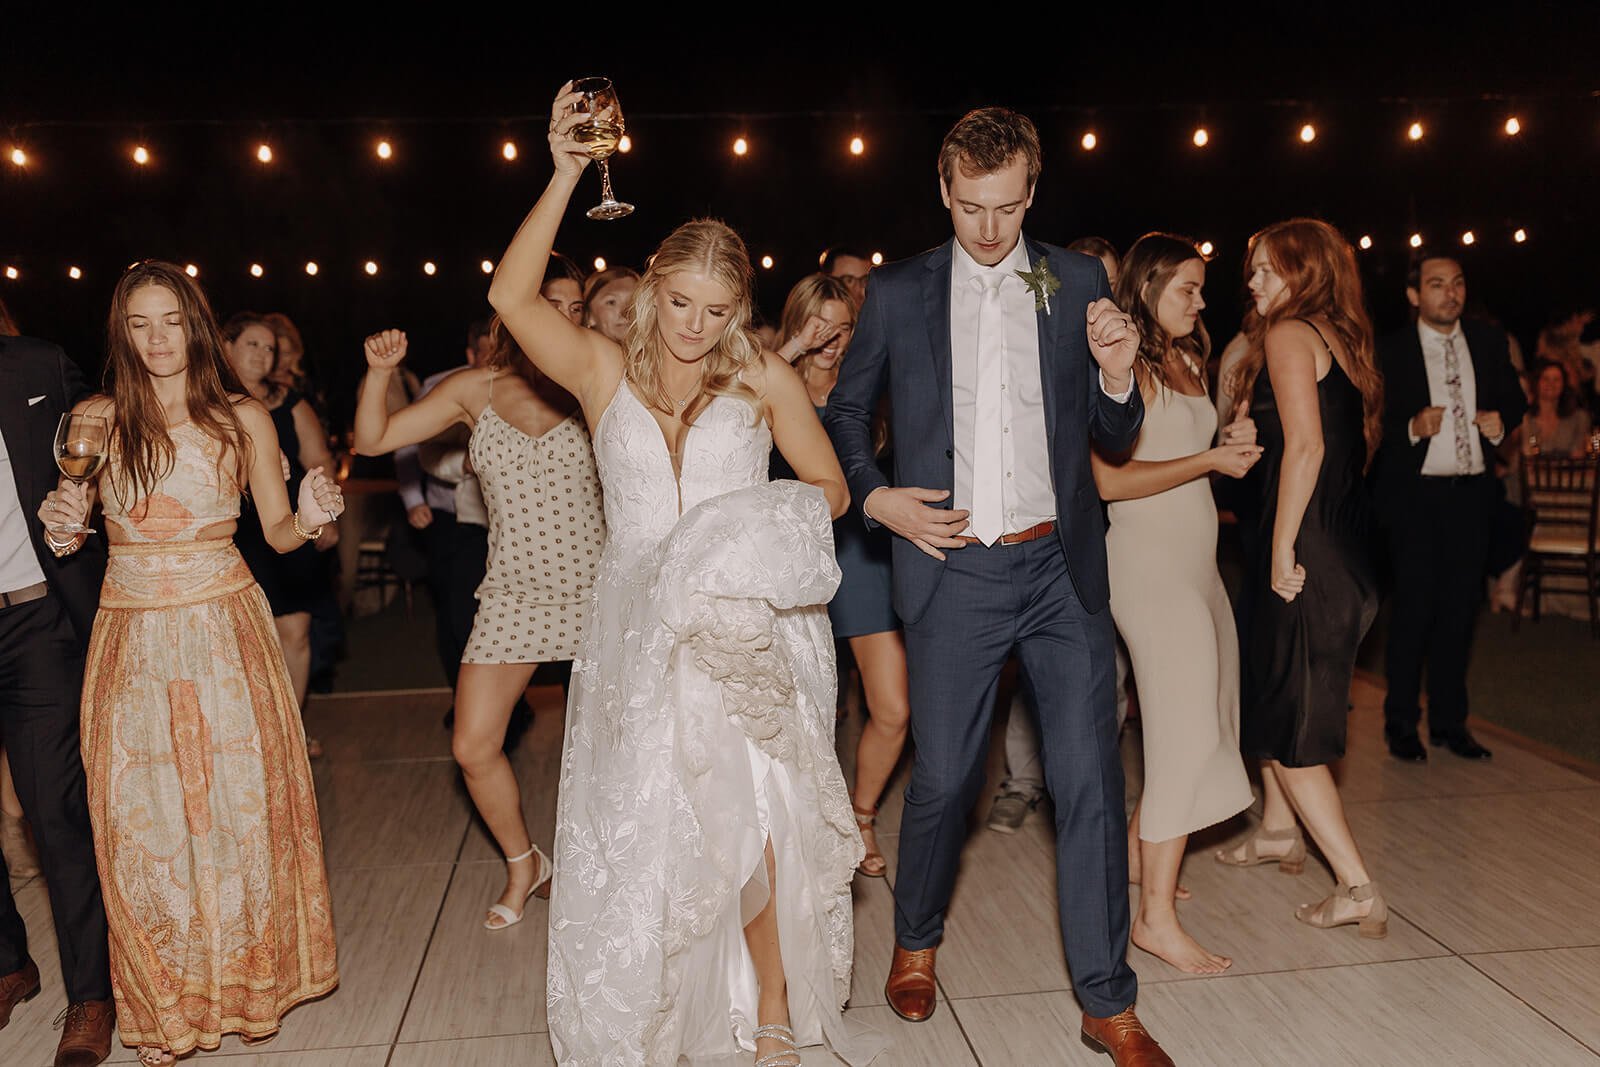 Bride and groom dance with guests under lights at an evening outdoor desert wedding reception